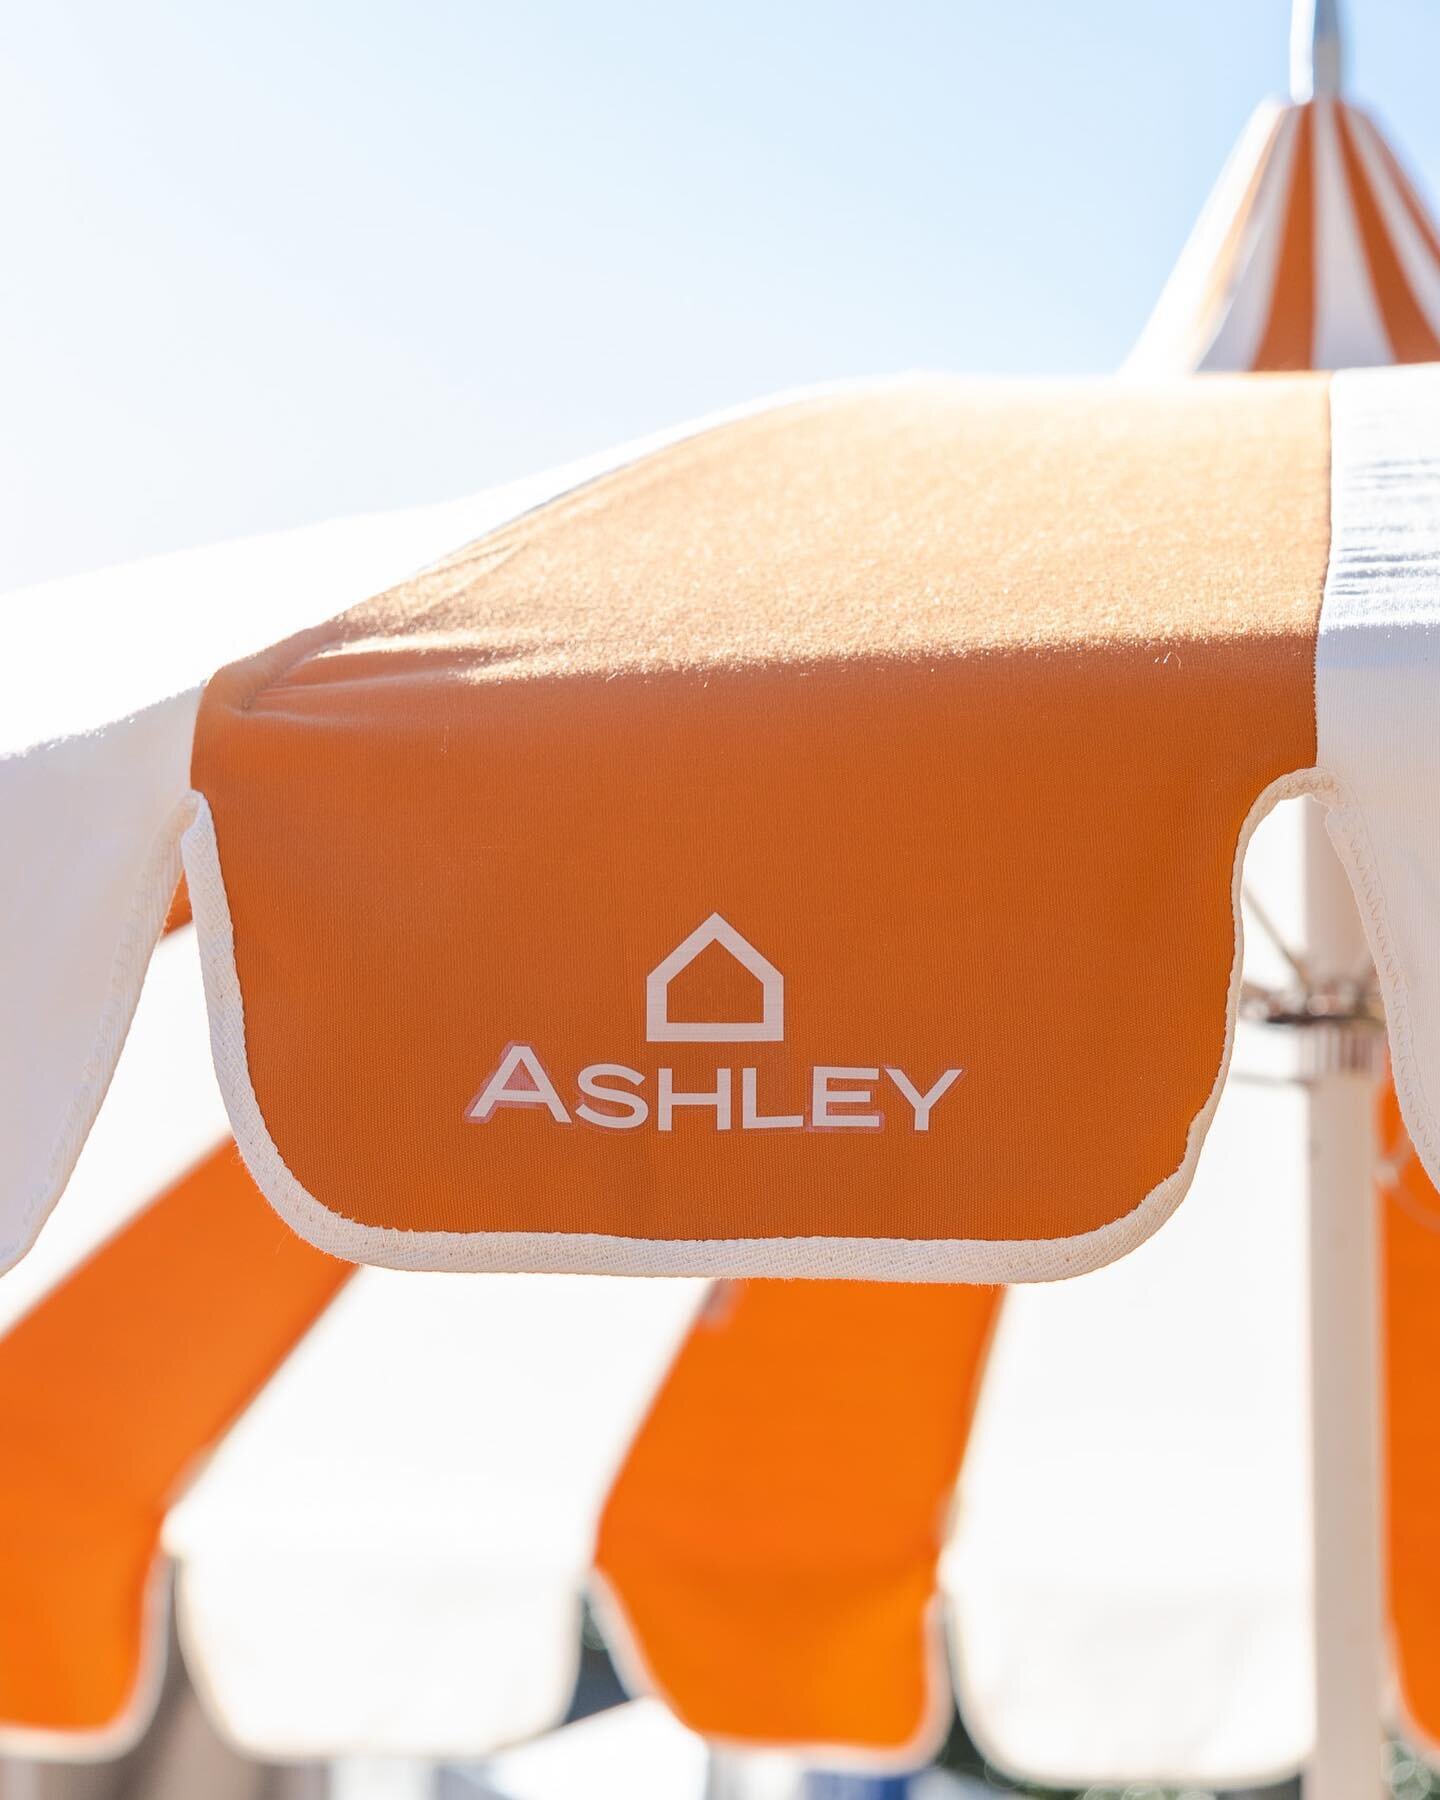 The @ashleyofficial Lounge at @valsparchamp ⛳️ 
&mdash;&mdash;&mdash;
📷 @arcilect 
&mdash;&mdash;&mdash;
#oroeventco #ashley #pga #valspar #golf #experiential #experientialevents #eventplanner #eventdesigner #tampa